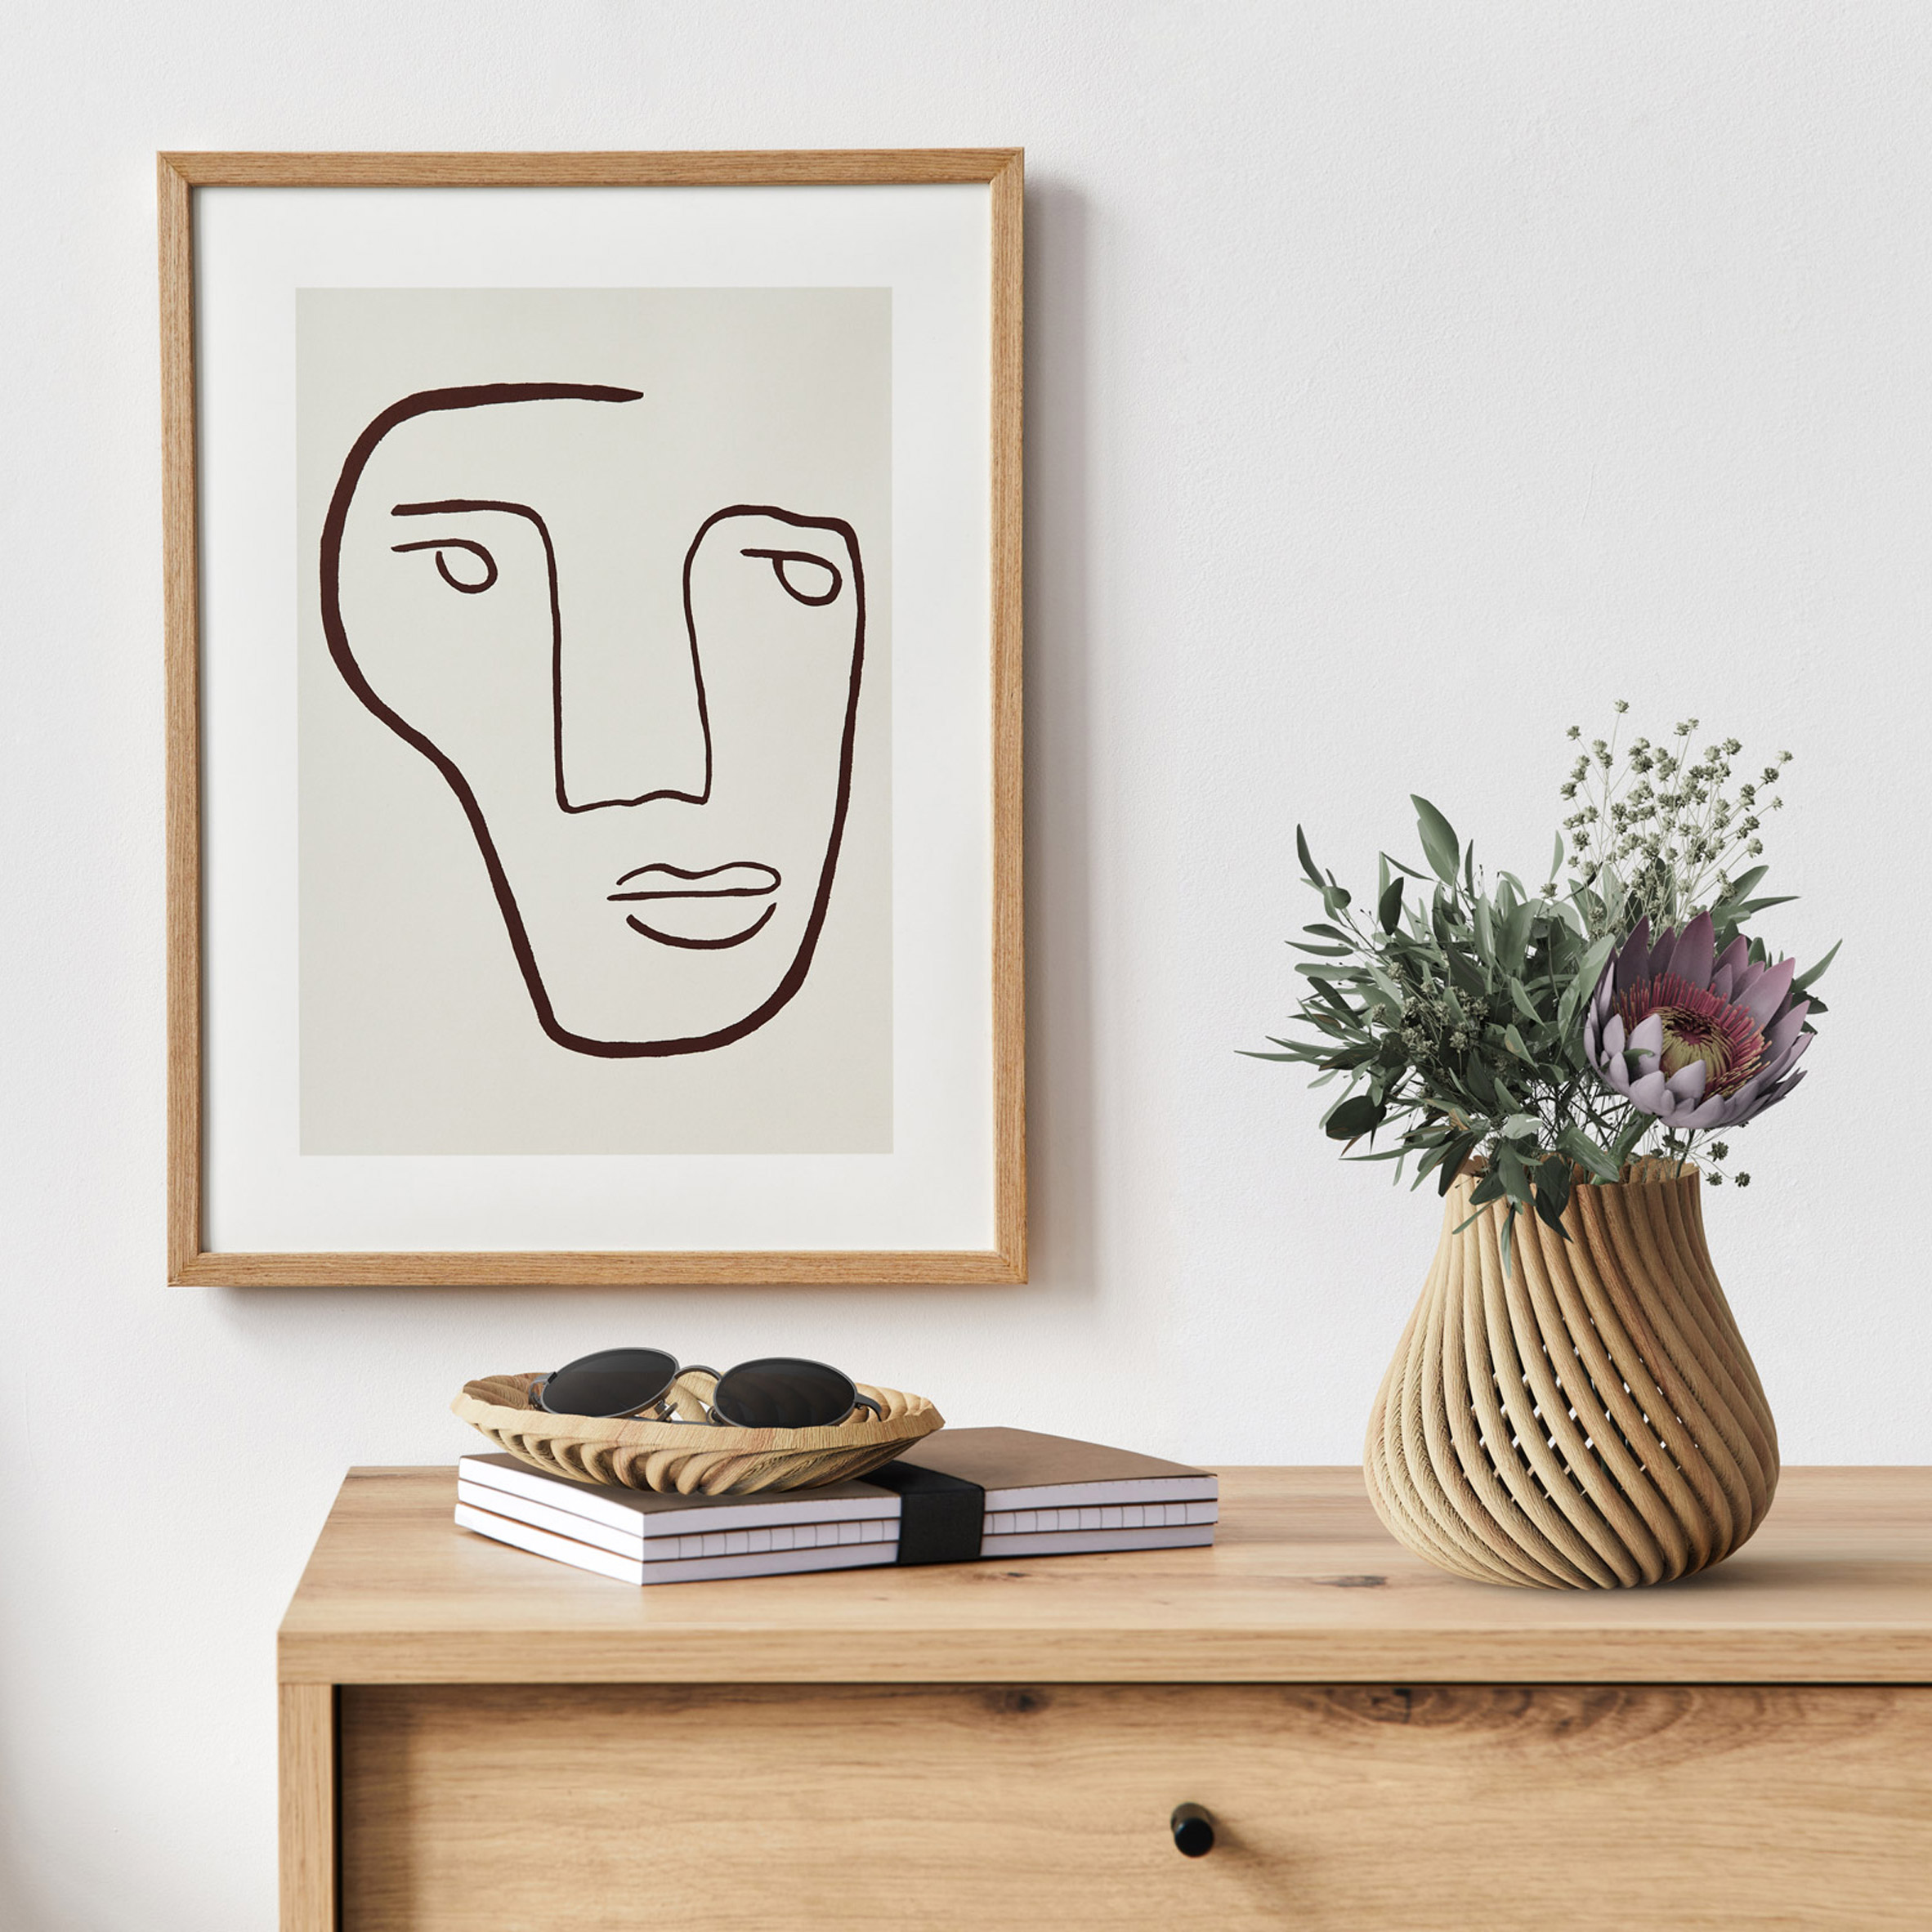 Dezeen's Christmas gift guide for architects and designers